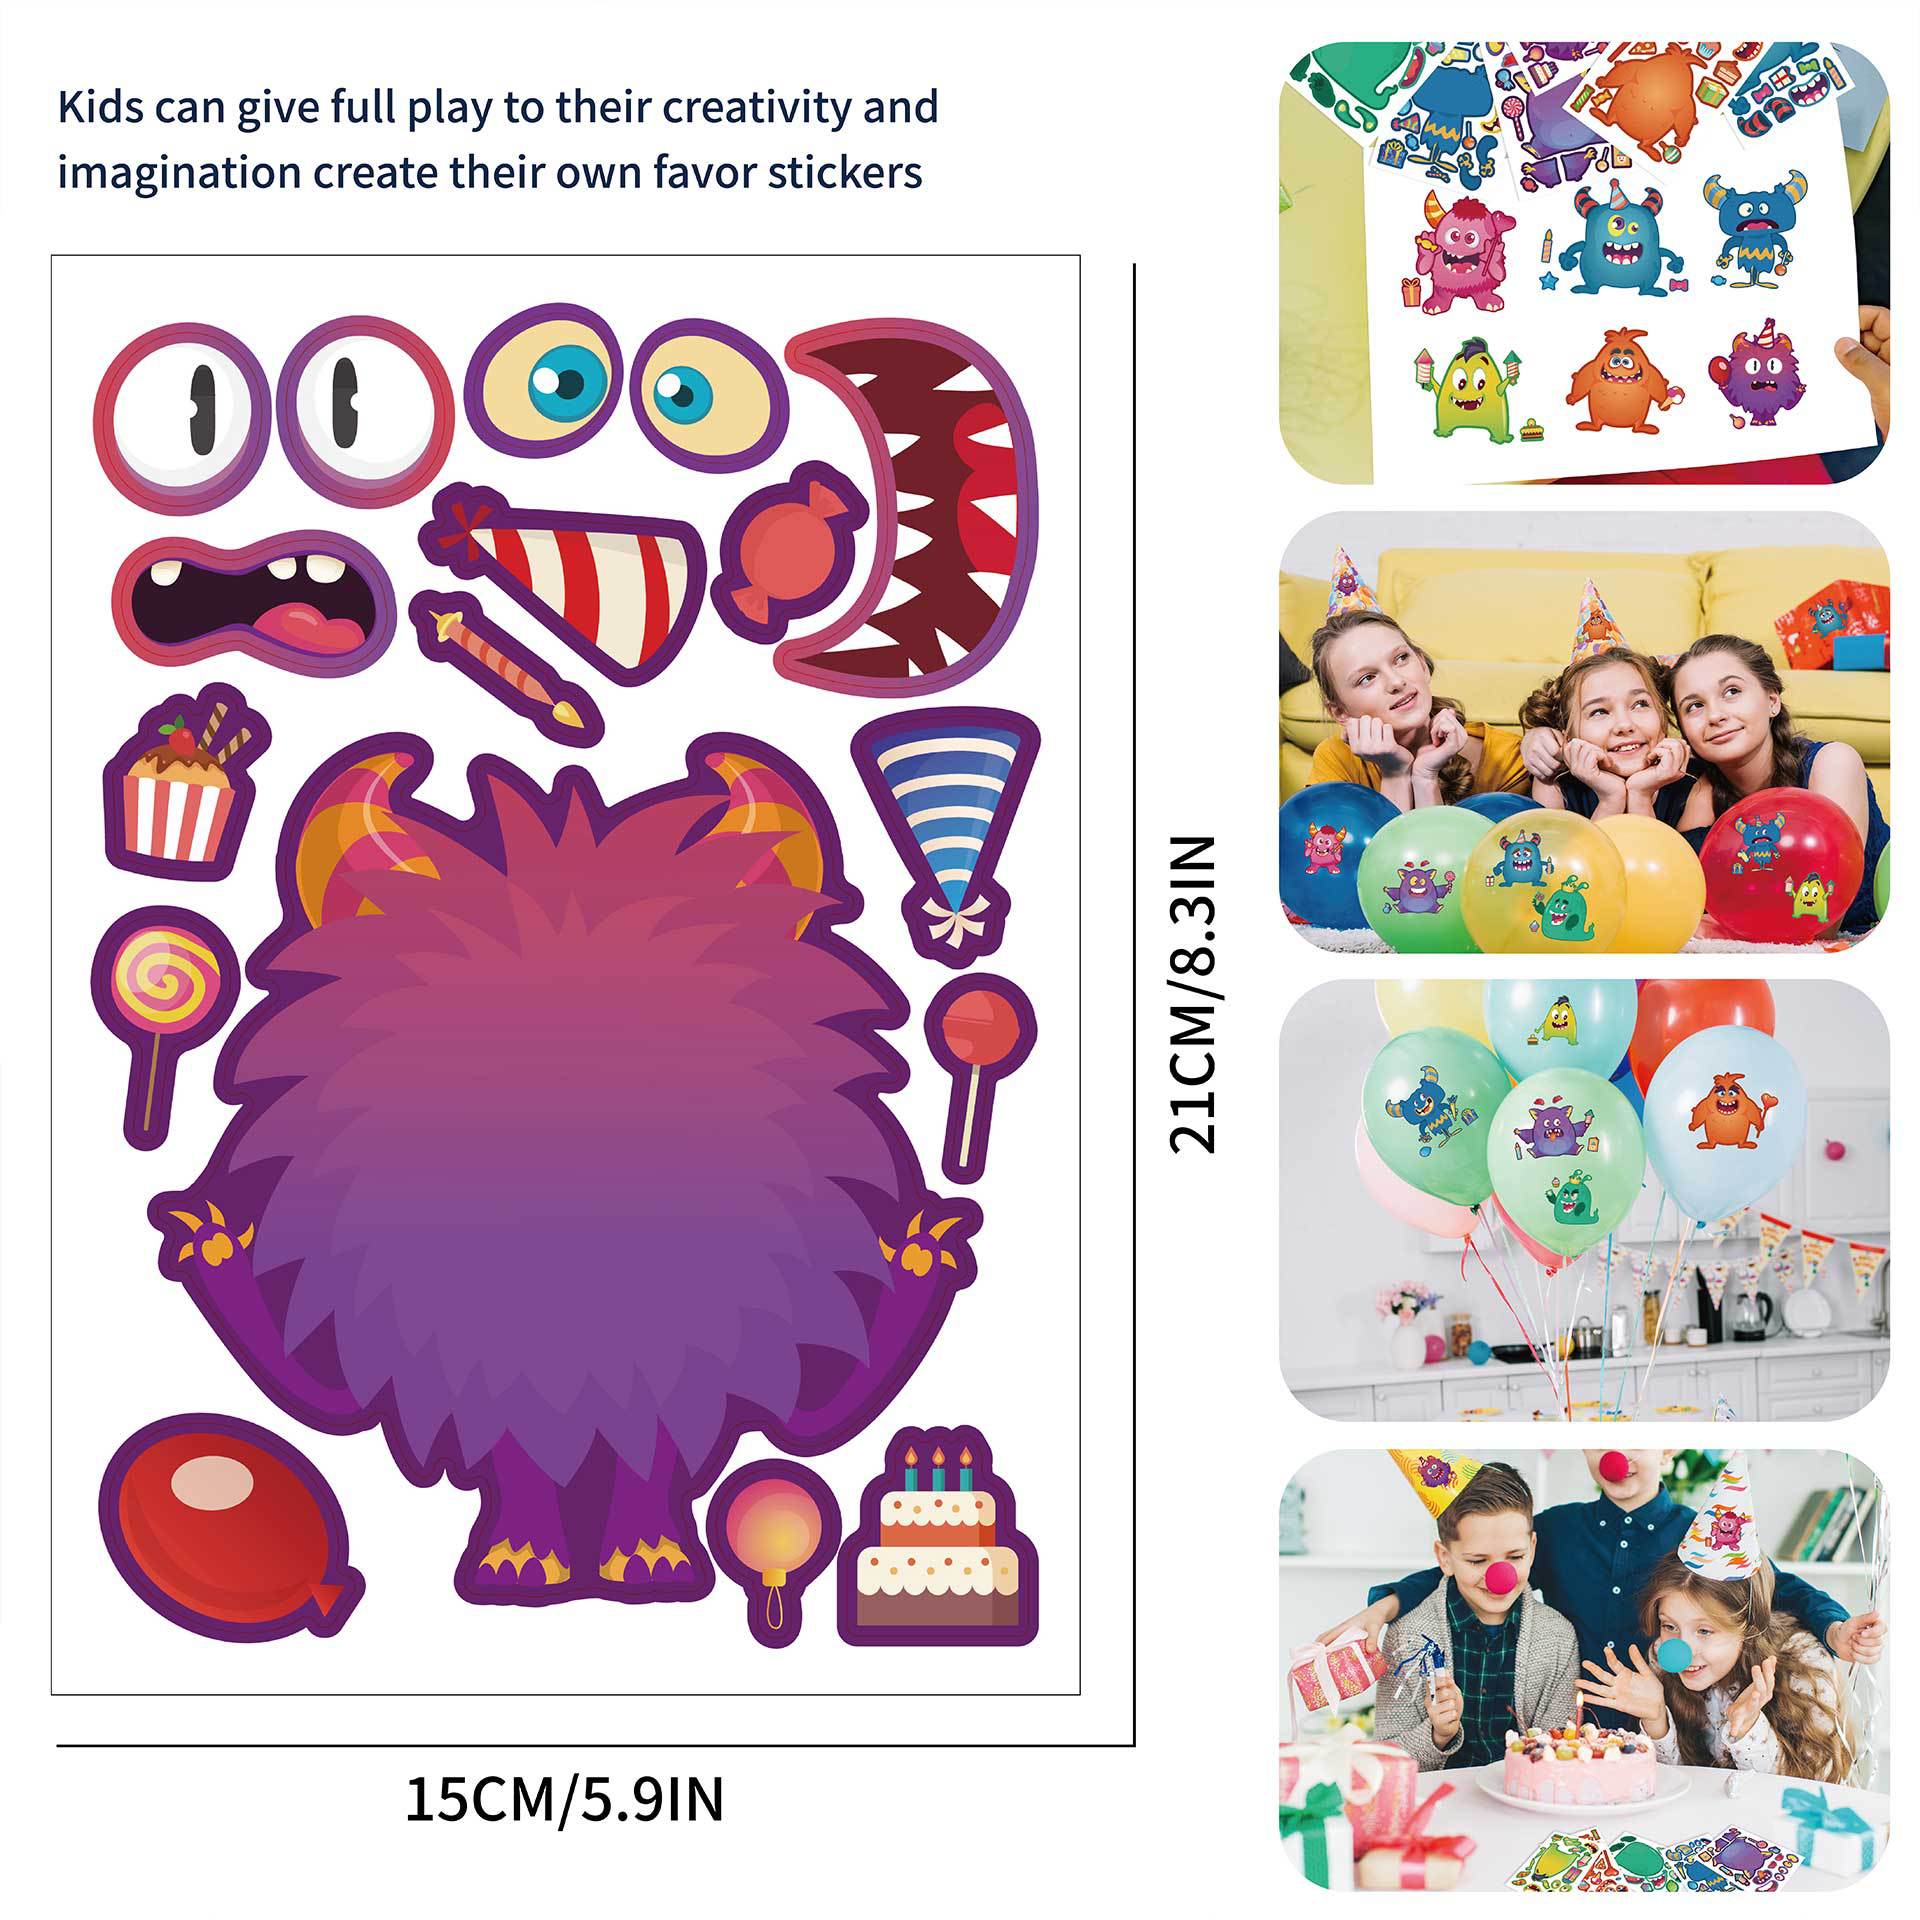 32 Sheets Monster Party Theme Make Your Own Stickers for Kids Birthday